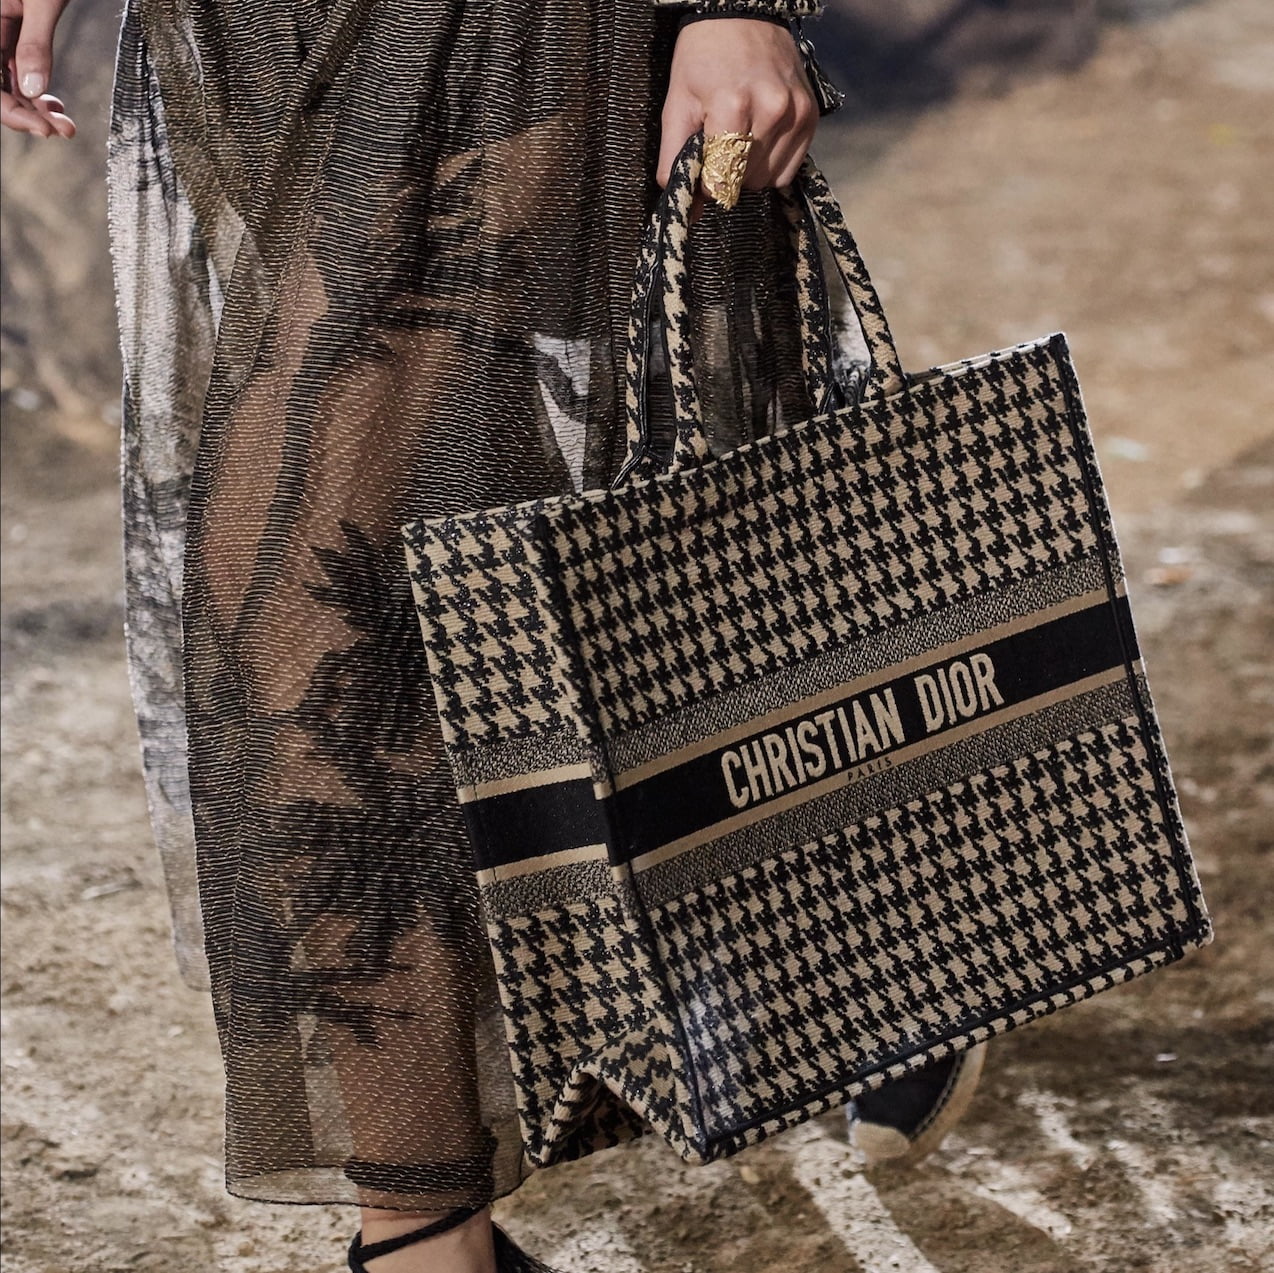 There's a New Small Dior Book Tote in Town - PurseBop